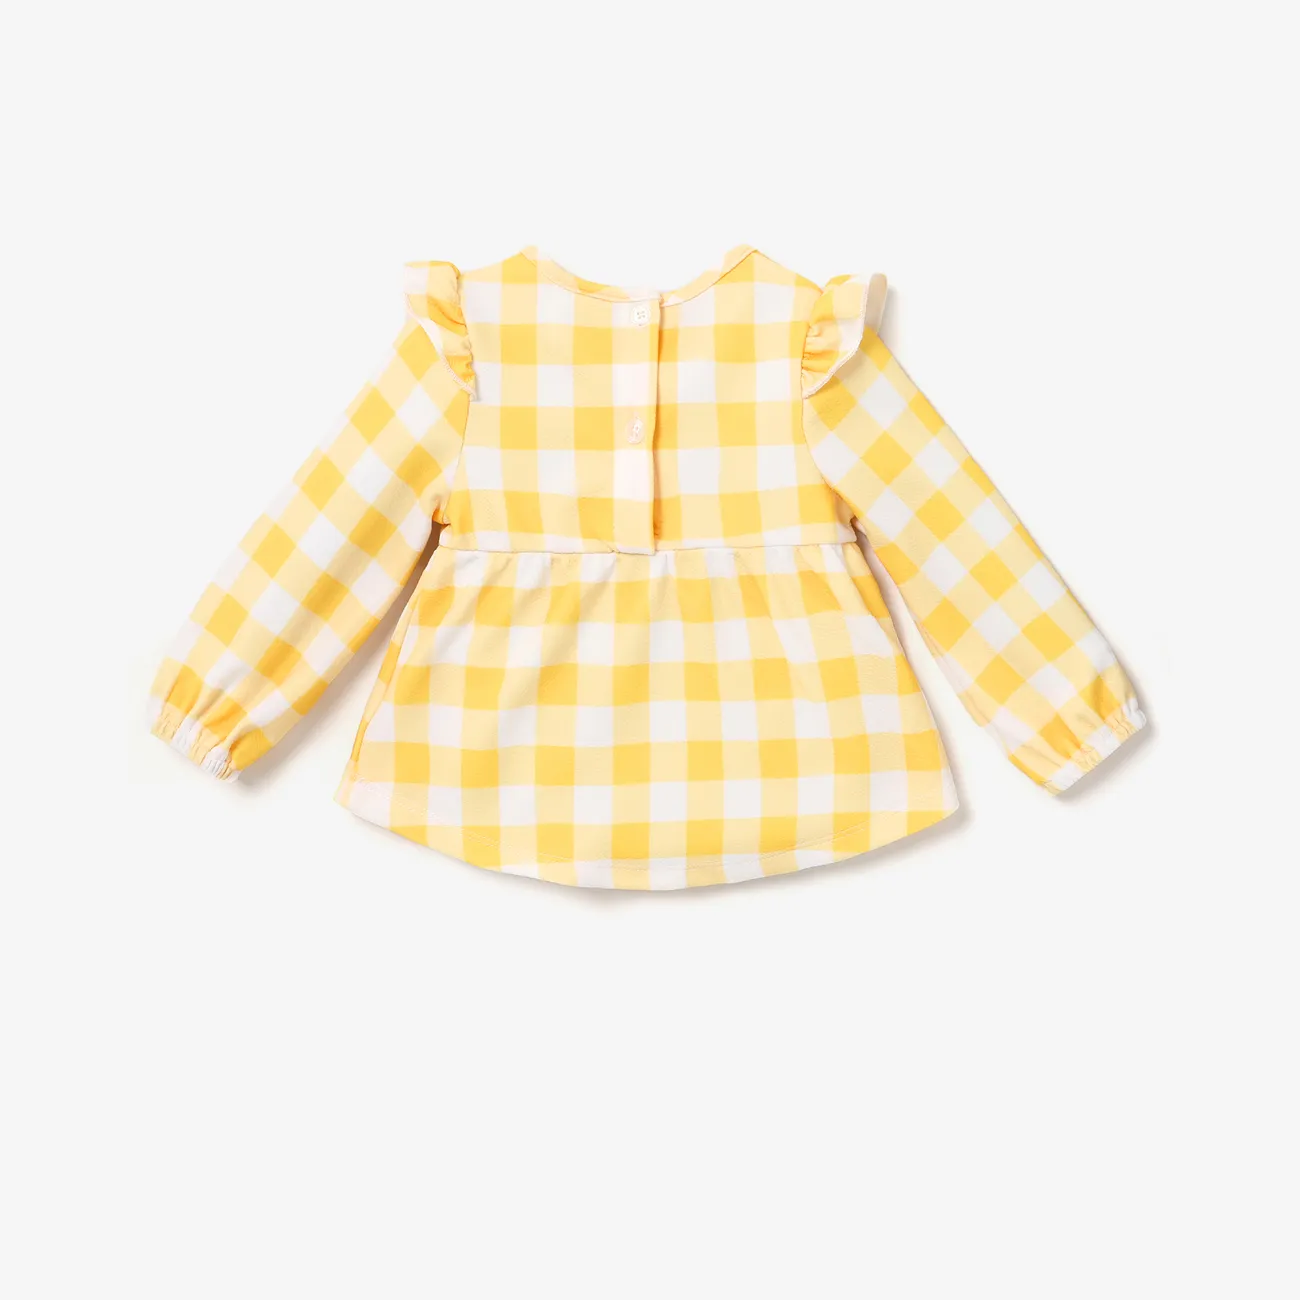 Disney Winnie the Pooh character pattern plaid top paired or with knitted stretch denim jeans Yellow big image 1